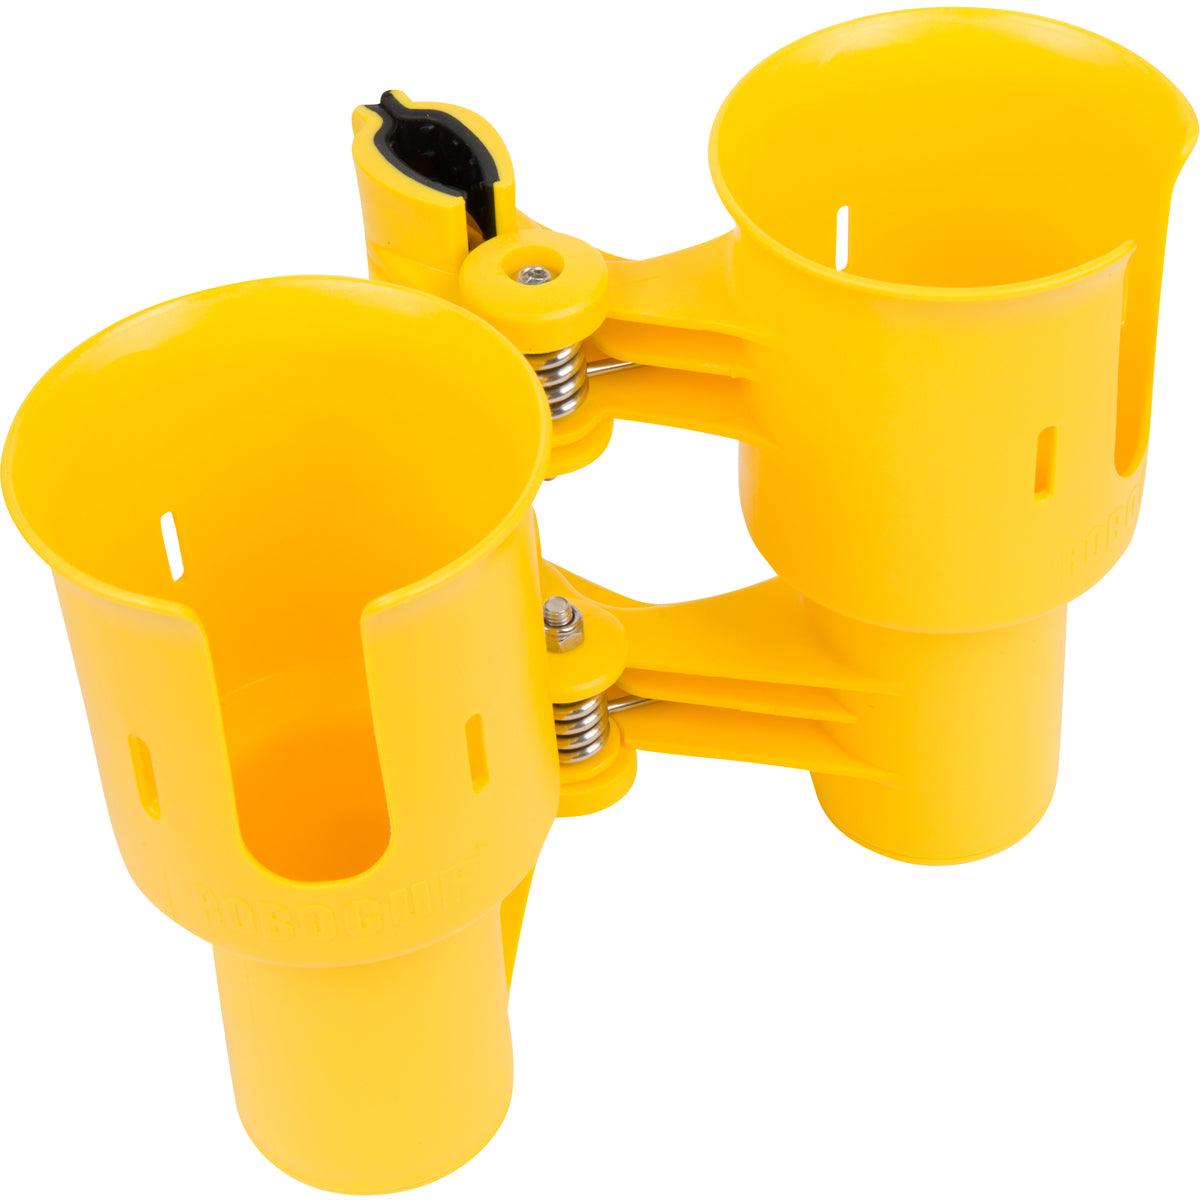 ROBOCUP 12 Colors, Best Cup Holder for Drinks, Fishing Rod/Pole, Boat,  Beach Chair, Golf Cart, Wheelchair, Walker, Drum Sticks, Microphone Stand